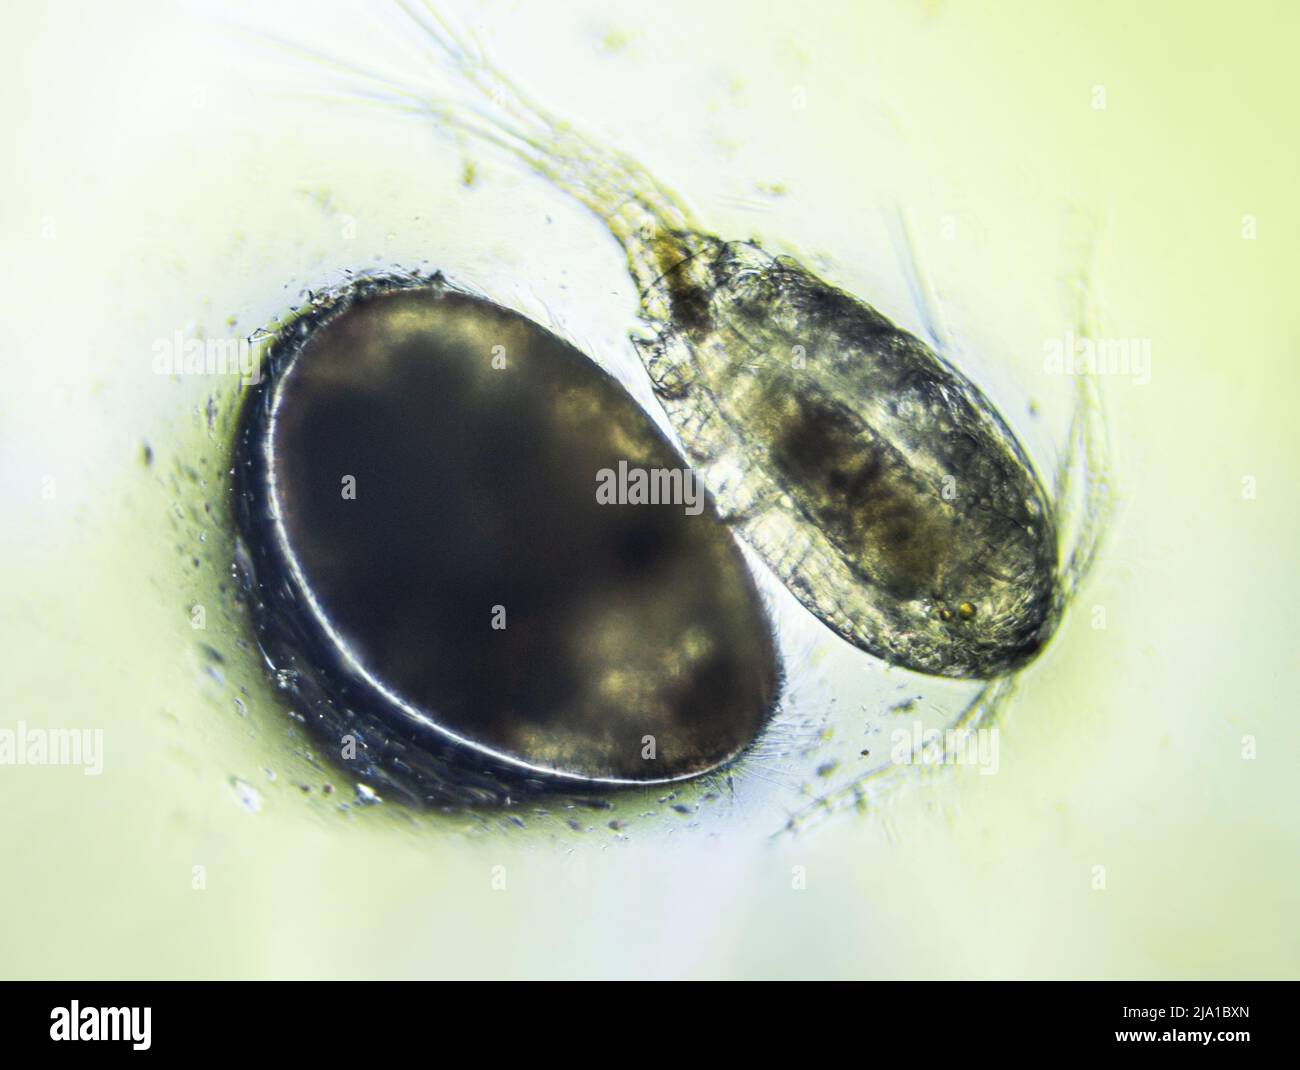 Ostracod and Copepod Cyclops is small crustacean found in freshwater pond. Zooplankton, micro crustacean under the light microscope. Magnification of Stock Photo